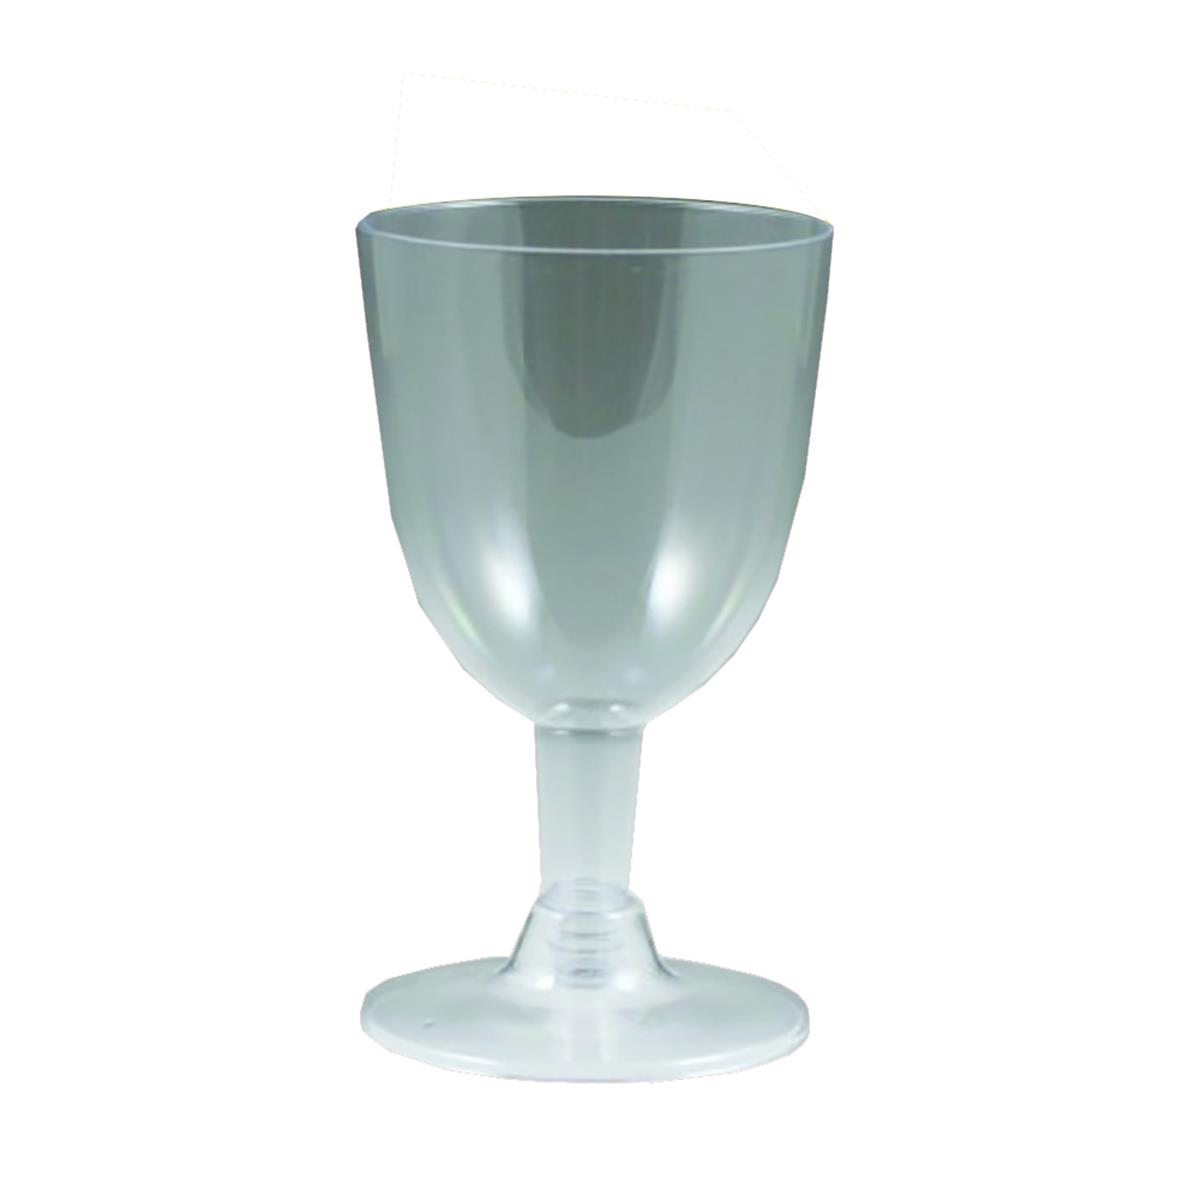 Mpi92260 Pe Clear Sovereign Wine Glass Value Pack - Case Of 144